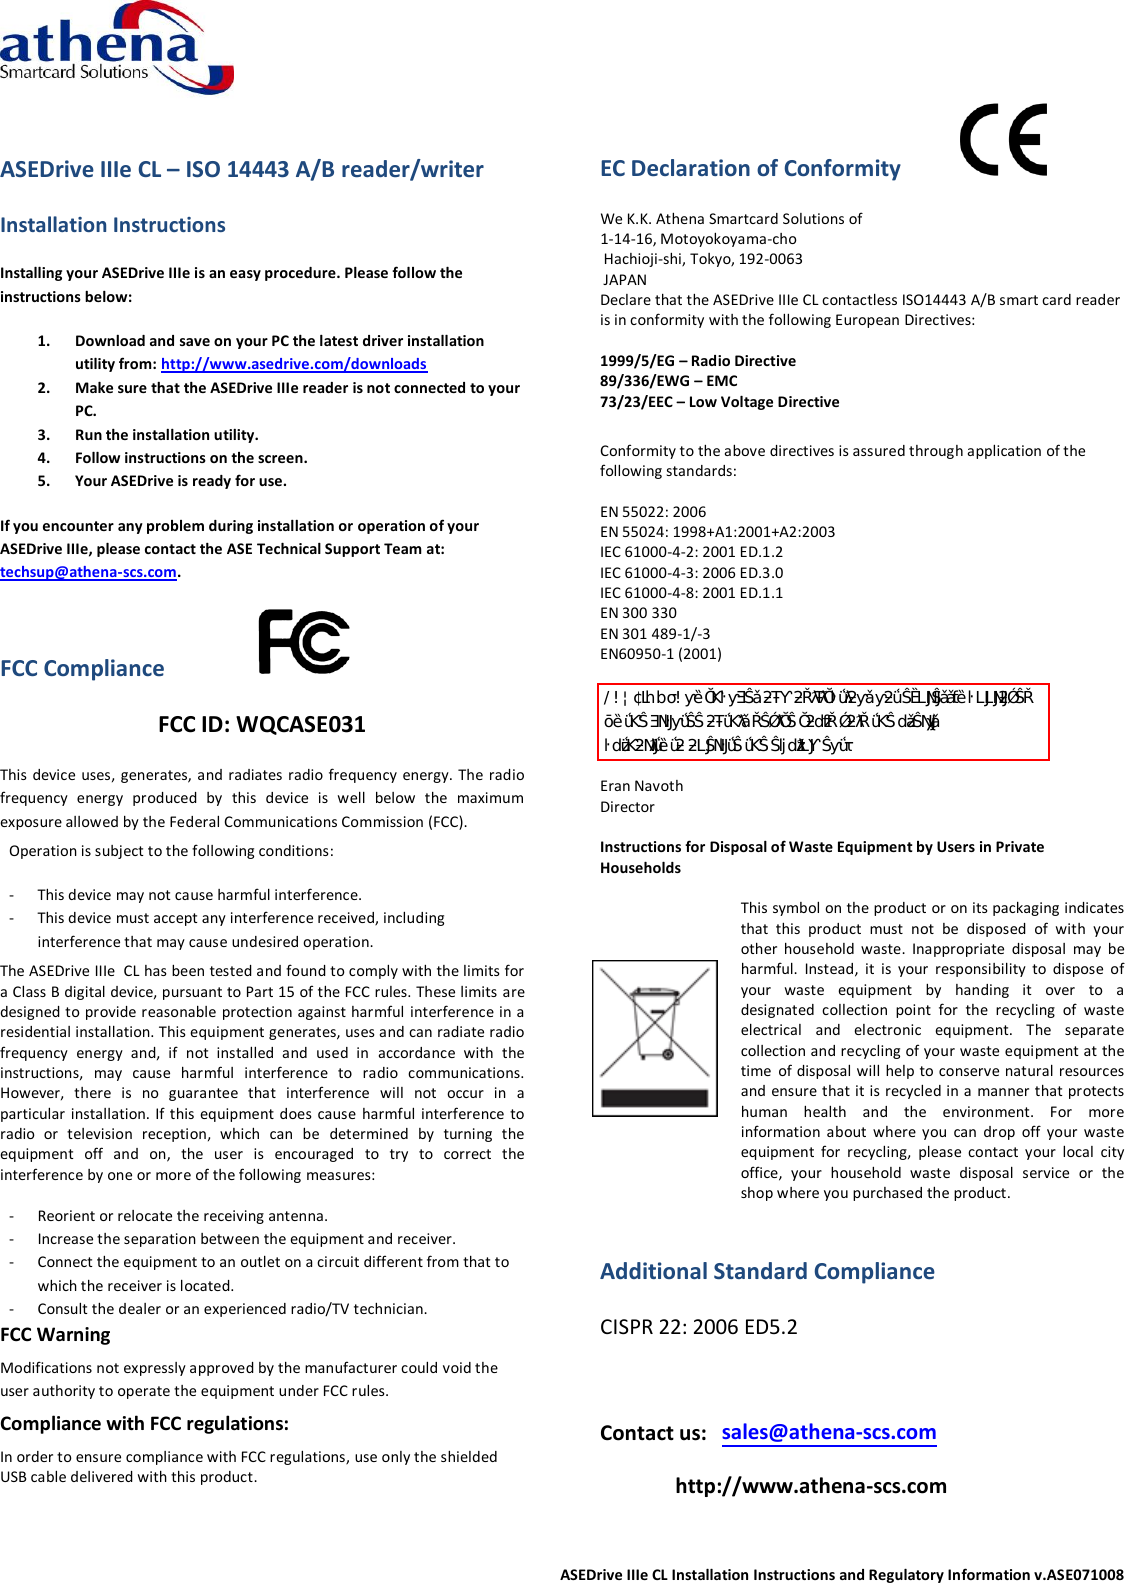  ASEDrive IIIe CL Installation Instructions and Regulatory Information v.ASE071008  ASEDrive IIIe CL – ISO 14443 A/B reader/writer Installation Instructions Installing your ASEDrive IIIe is an easy procedure. Please follow the instructions below: 1. Download and save on your PC the latest driver installation utility from: http://www.asedrive.com/downloads 2. Make sure that the ASEDrive IIIe reader is not connected to your PC. 3. Run the installation utility. 4. Follow instructions on the screen. 5. Your ASEDrive is ready for use. If you encounter any problem during installation or operation of your ASEDrive IIIe, please contact the ASE Technical Support Team at: techsup@athena-scs.com. FCC Compliance                  FCC ID: WQCASE031             This device uses,  generates, and radiates radio frequency  energy. The radio frequency  energy  produced  by  this  device  is  well  below  the  maximum exposure allowed by the Federal Communications Commission (FCC). Operation is subject to the following conditions:  - This device may not cause harmful interference. - This device must accept any interference received, including interference that may cause undesired operation. The ASEDrive IIIe  CL has been tested and found to comply with the limits for a Class B digital device, pursuant to Part 15 of the FCC rules. These limits are designed to provide reasonable protection against harmful interference in a residential installation. This equipment generates, uses and can radiate radio frequency  energy  and,  if  not  installed  and  used  in  accordance  with  the instructions,  may  cause  harmful  interference  to  radio  communications. However,  there  is  no  guarantee  that  interference  will  not  occur  in  a particular installation. If this  equipment  does  cause harmful  interference to radio  or  television  reception,  which  can  be  determined  by  turning  the equipment  off  and  on,  the  user  is  encouraged  to  try  to  correct  the interference by one or more of the following measures:  - Reorient or relocate the receiving antenna.  - Increase the separation between the equipment and receiver. - Connect the equipment to an outlet on a circuit different from that to which the receiver is located. - Consult the dealer or an experienced radio/TV technician. FCC Warning Modifications not expressly approved by the manufacturer could void the user authority to operate the equipment under FCC rules. Compliance with FCC regulations: In order to ensure compliance with FCC regulations, use only the shielded USB cable delivered with this product.  EC Declaration of Conformity            We K.K. Athena Smartcard Solutions of  1-14-16, Motoyokoyama-cho  Hachioji-shi, Tokyo, 192-0063  JAPAN Declare that the ASEDrive IIIe CL contactless ISO14443 A/B smart card reader is in conformity with the following European Directives:  1999/5/EG – Radio Directive 89/336/EWG – EMC 73/23/EEC – Low Voltage Directive  Conformity to the above directives is assured through application of the following standards:  EN 55022: 2006 EN 55024: 1998+A1:2001+A2:2003 IEC 61000-4-2: 2001 ED.1.2 IEC 61000-4-3: 2006 ED.3.0 IEC 61000-4-8: 2001 ED.1.1  EN 300 330 EN 301 489-1/-3 EN60950-1 (2001)   hd/KE͗ŶǇĐŚĂŶŐĞƐŽĨŵŽĚŝĨŝĐĂƚŝŽŶƐŶŽƚĞǆƉƌĞƐƐůǇĂƉƉƌŽǀĞĚ ďǇƚŚĞŐƌĂŶƚĞĞŽĨƚŚŝƐĚĞǀŝĐĞĐŽƵůĚǀŽŝĚƚŚĞƵƐĞƌ͛Ɛ ĂƵƚŚŽƌŝƚǇƚŽŽƉĞƌĂƚĞƚŚĞĞƋƵŝƉŵĞŶƚ͘ Eran Navoth Director  Instructions for Disposal of Waste Equipment by Users in Private Households   This symbol on the product or on its packaging indicates that  this  product  must  not  be  disposed  of  with  your other  household  waste.  Inappropriate  disposal  may  be harmful.  Instead,  it  is  your  responsibility  to  dispose  of your  waste  equipment  by  handing  it  over  to  a designated  collection  point  for  the  recycling  of  waste electrical  and  electronic  equipment.  The  separate collection and recycling of your waste equipment at the time of disposal will help to conserve natural resources and ensure that it is recycled in a manner that protects human  health  and  the  environment.  For  more information  about  where  you  can  drop  off  your  waste equipment  for  recycling,  please  contact  your  local  city office,  your  household  waste  disposal  service  or  the shop where you purchased the product.  Additional Standard Compliance CISPR 22: 2006 ED5.2  Contact us:  sales@athena-scs.com   http://www.athena-scs.com 